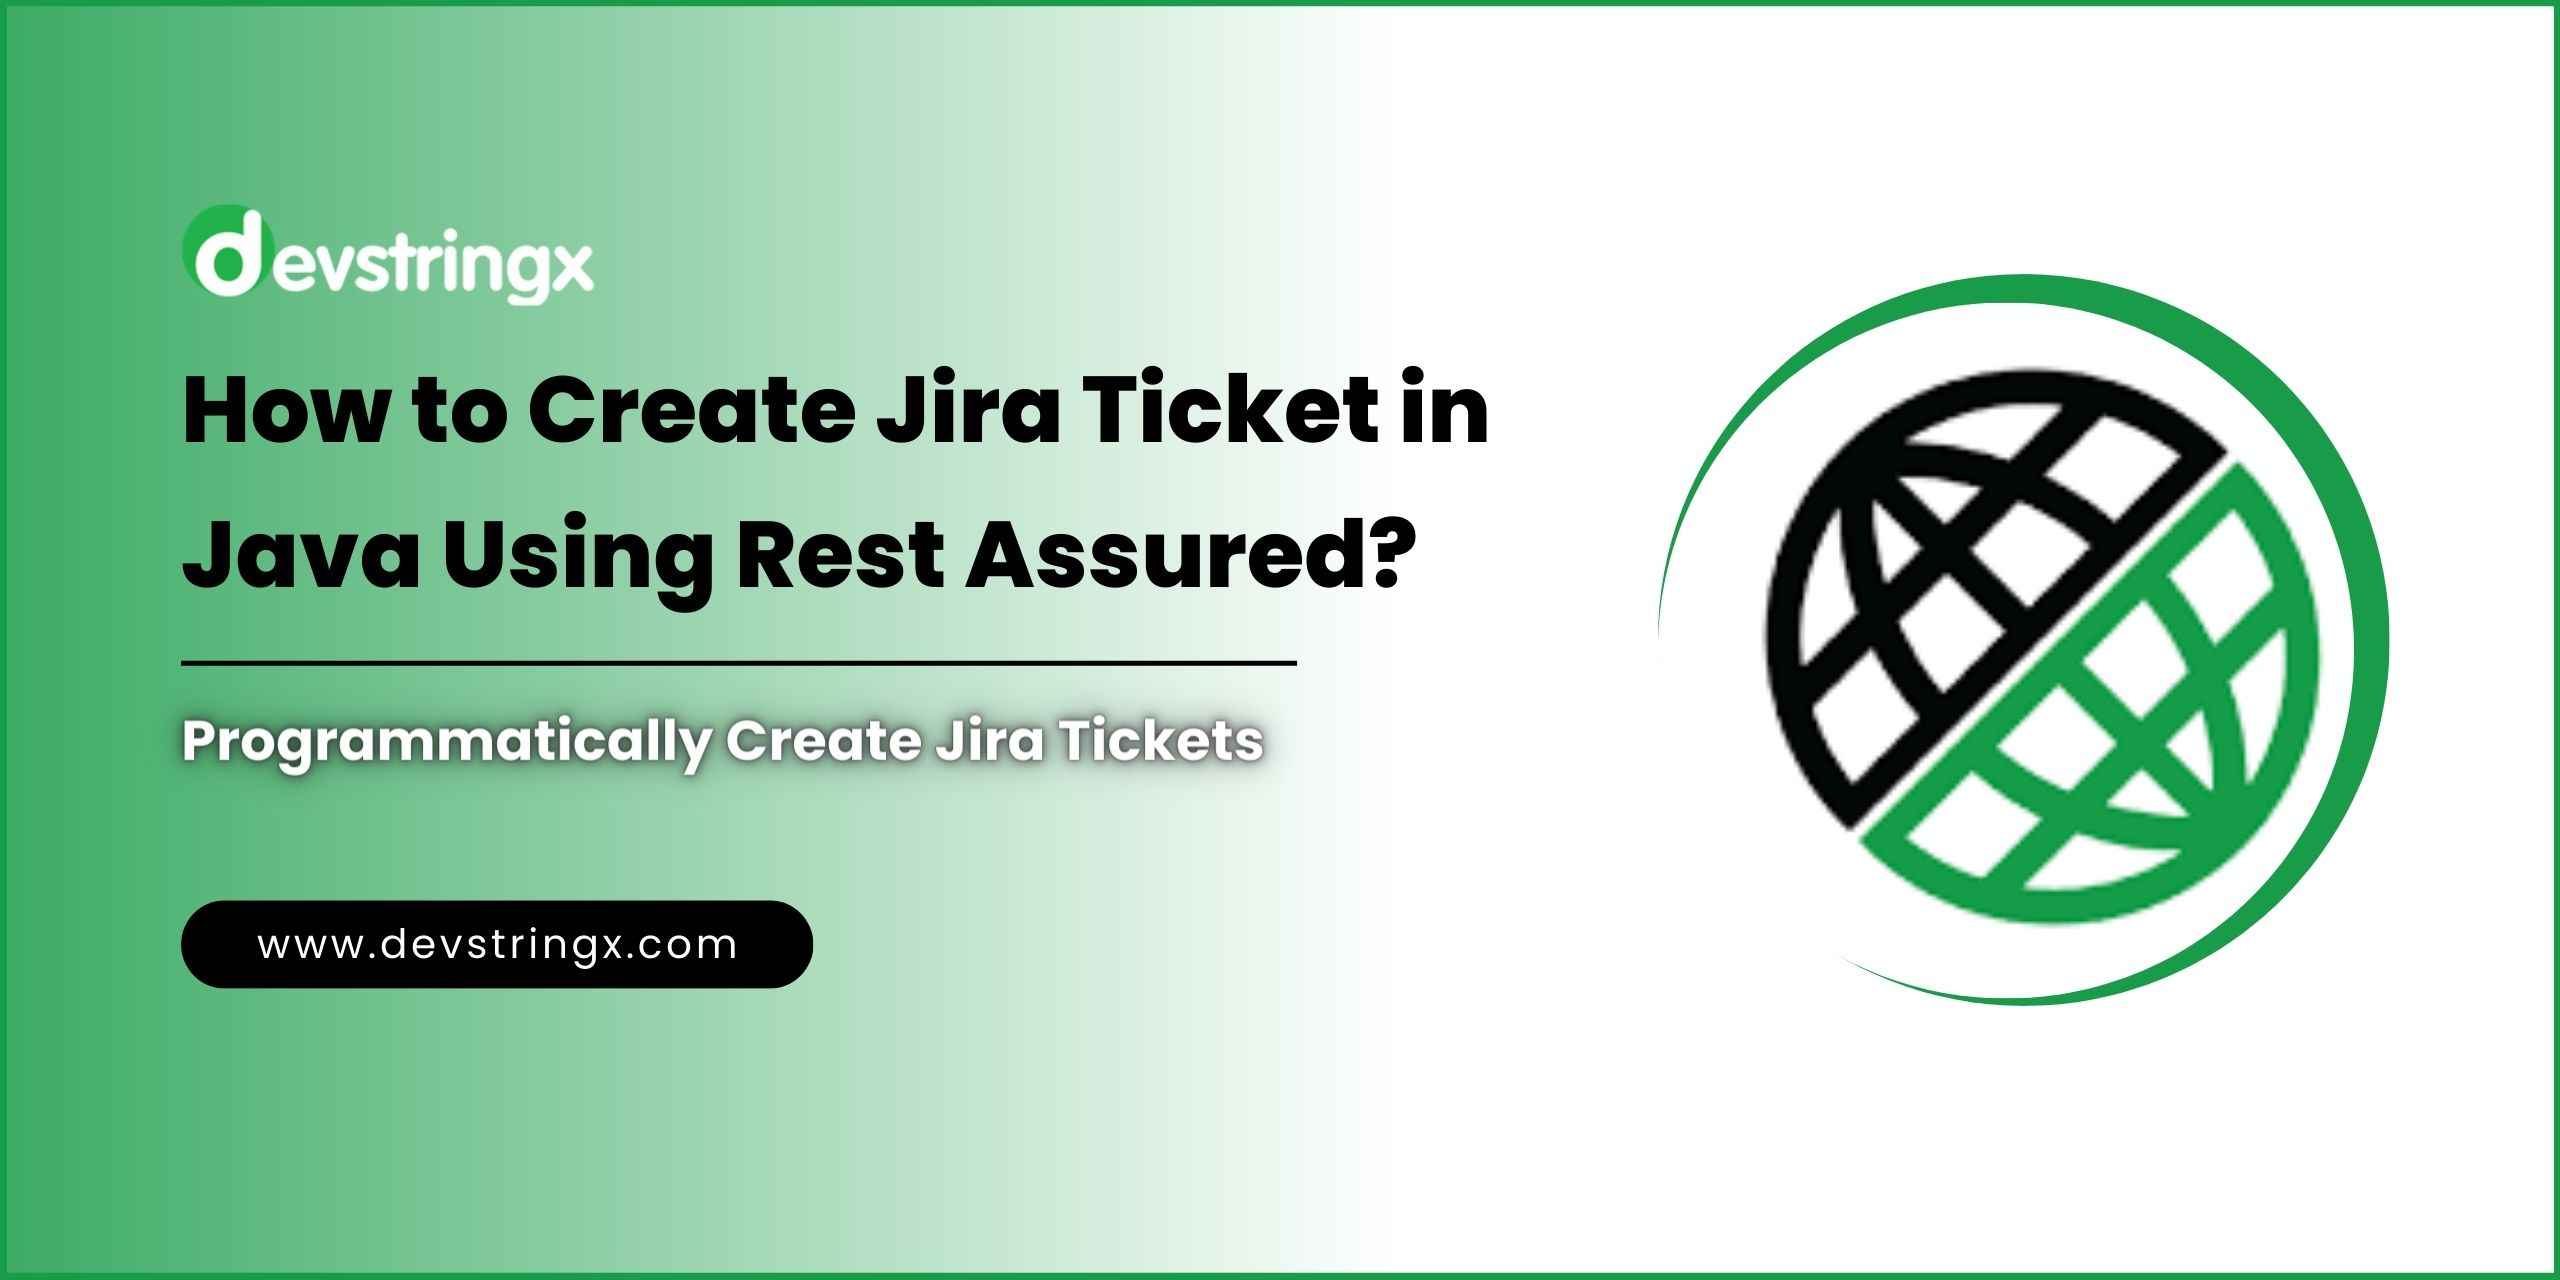 Feature image for Jira ticket creation blog